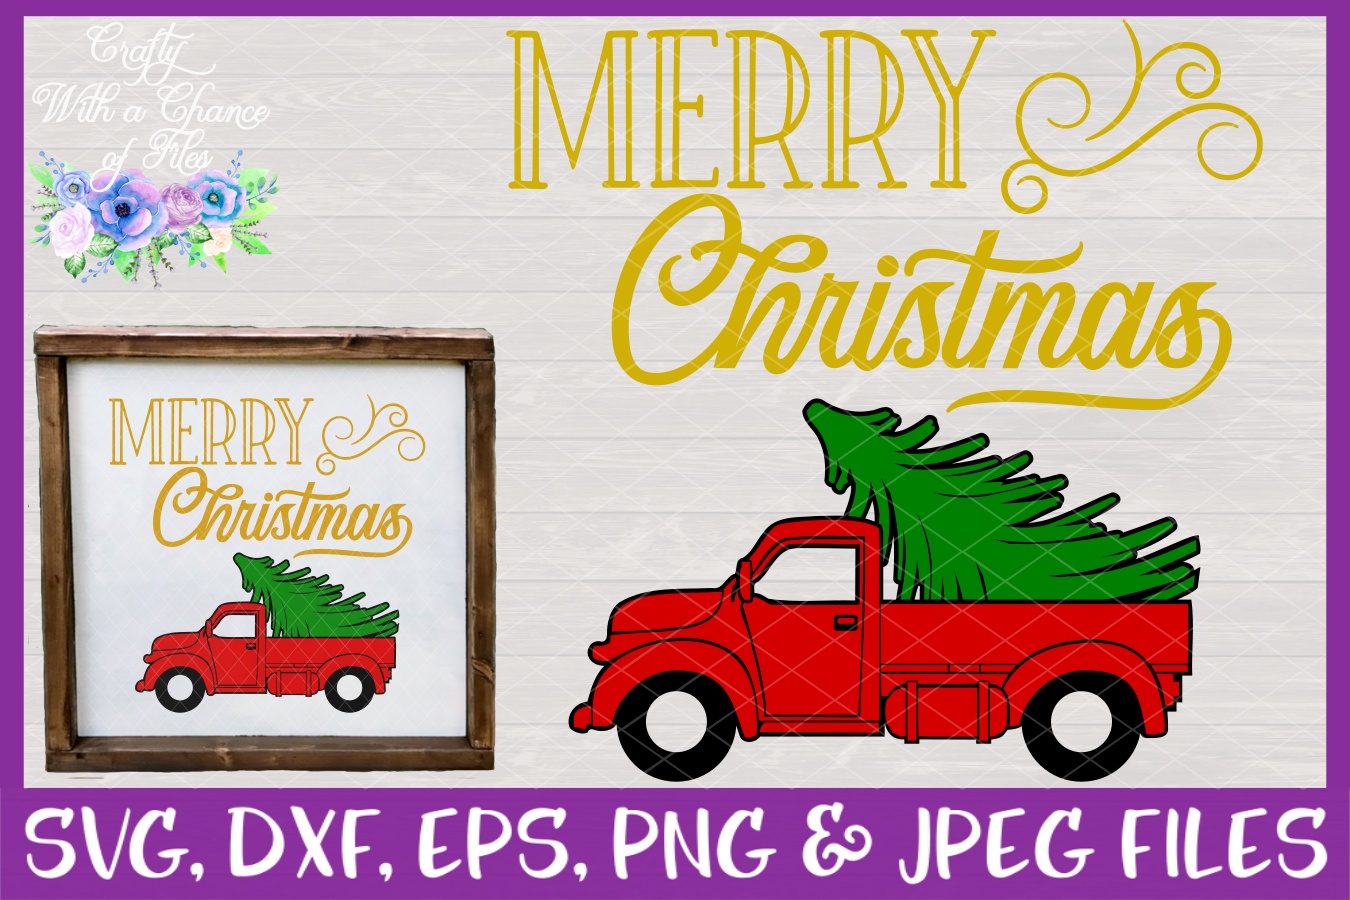 Download Merry Christmas SVG | Red Truck SVG | Christmas Tree SVG ...